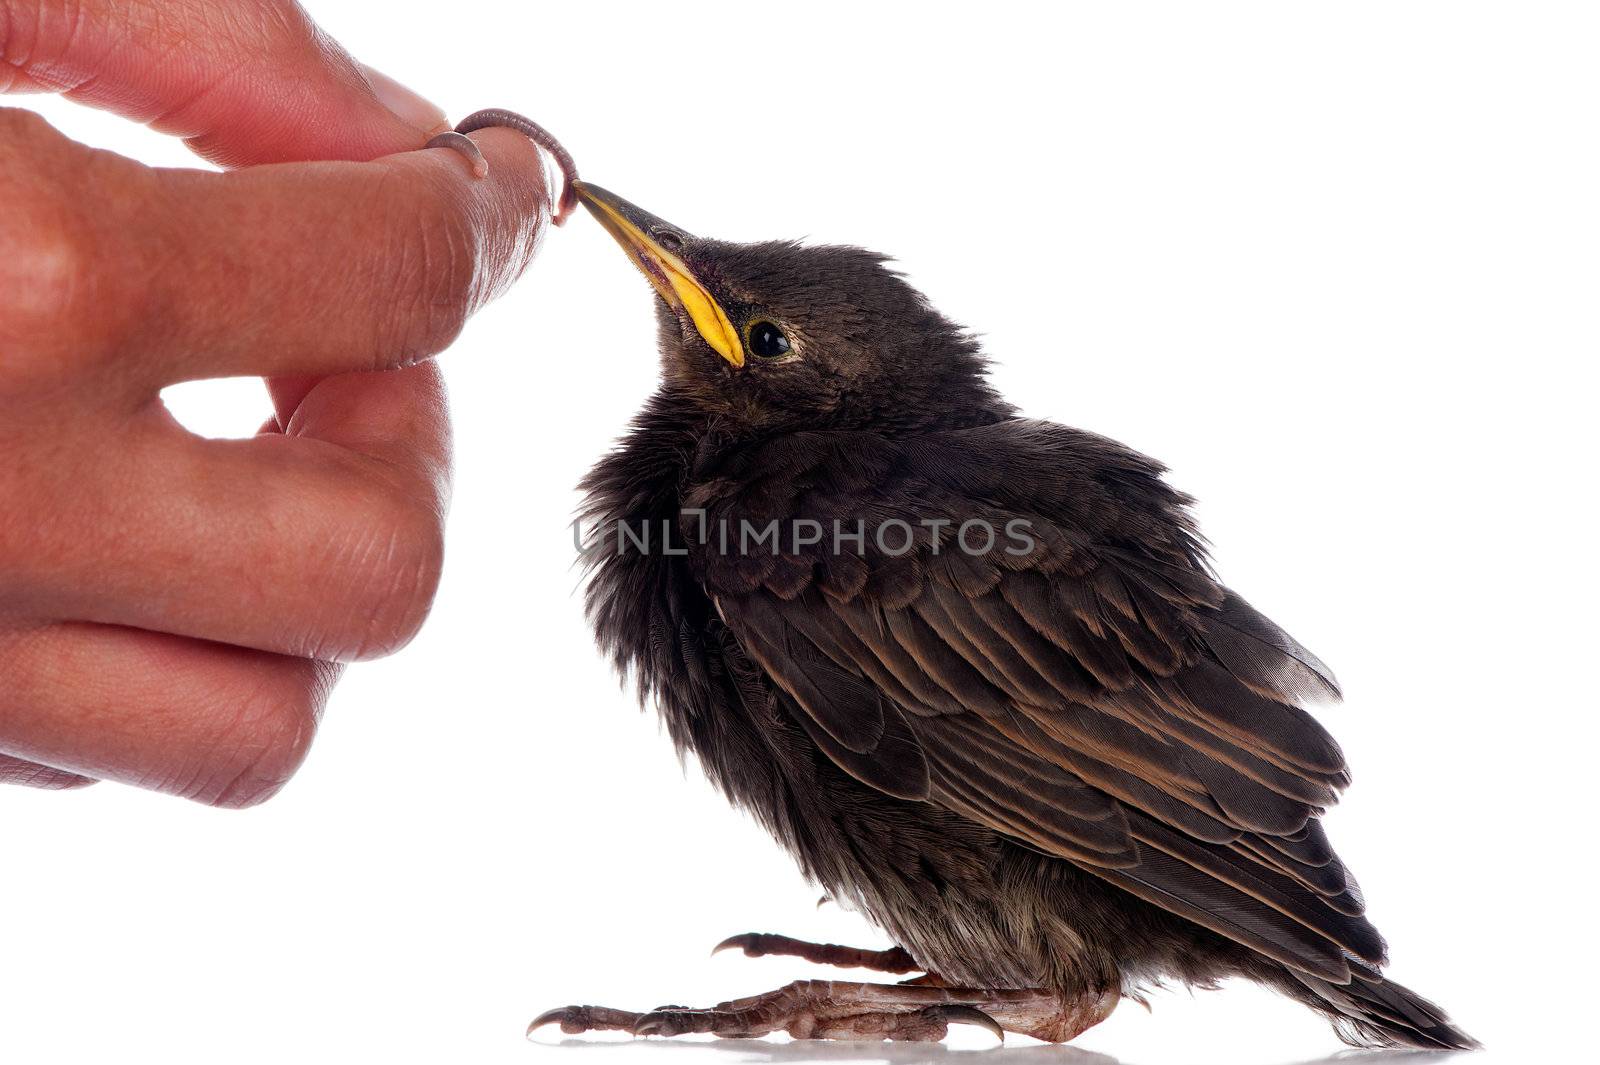 A baby starling is fed with an earthworm by a human hand.